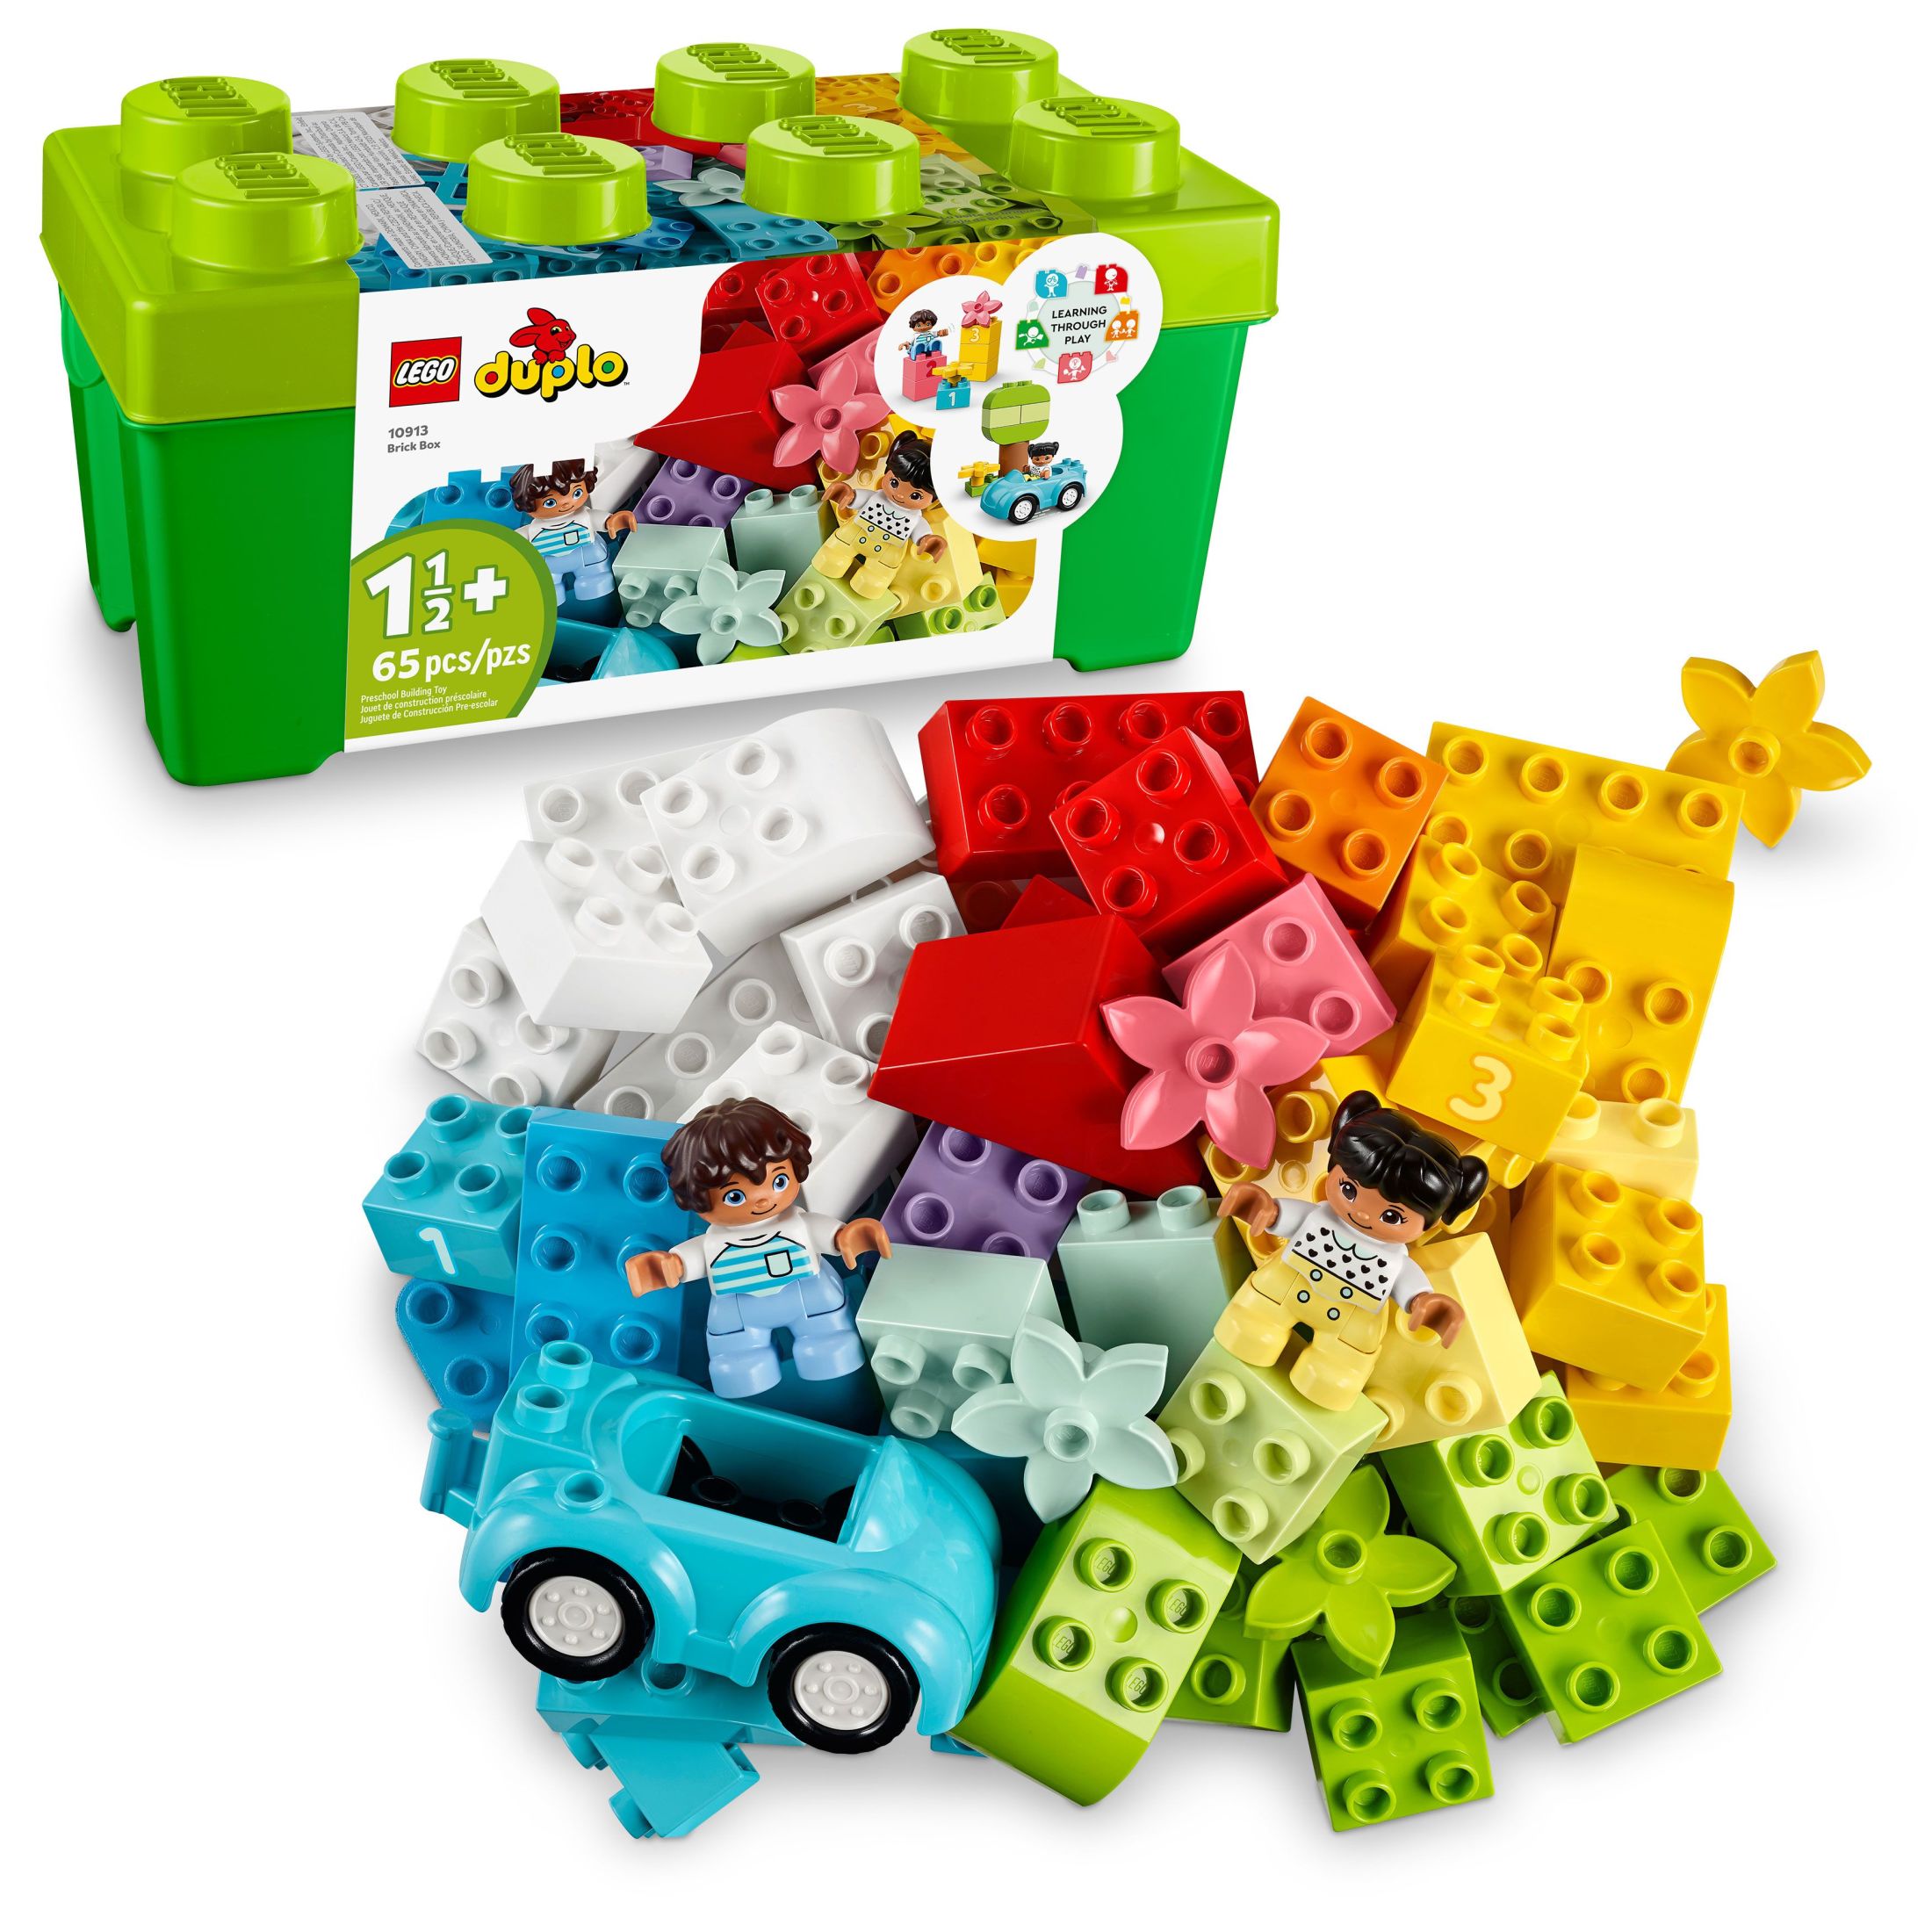 LEGO DUPLO Classic Brick Box Building Set with Storage 10913, Toy Car, Number Bricks and More, Learning Toys for Toddlers, Boys & Girls 18 Months Old - image 1 of 8